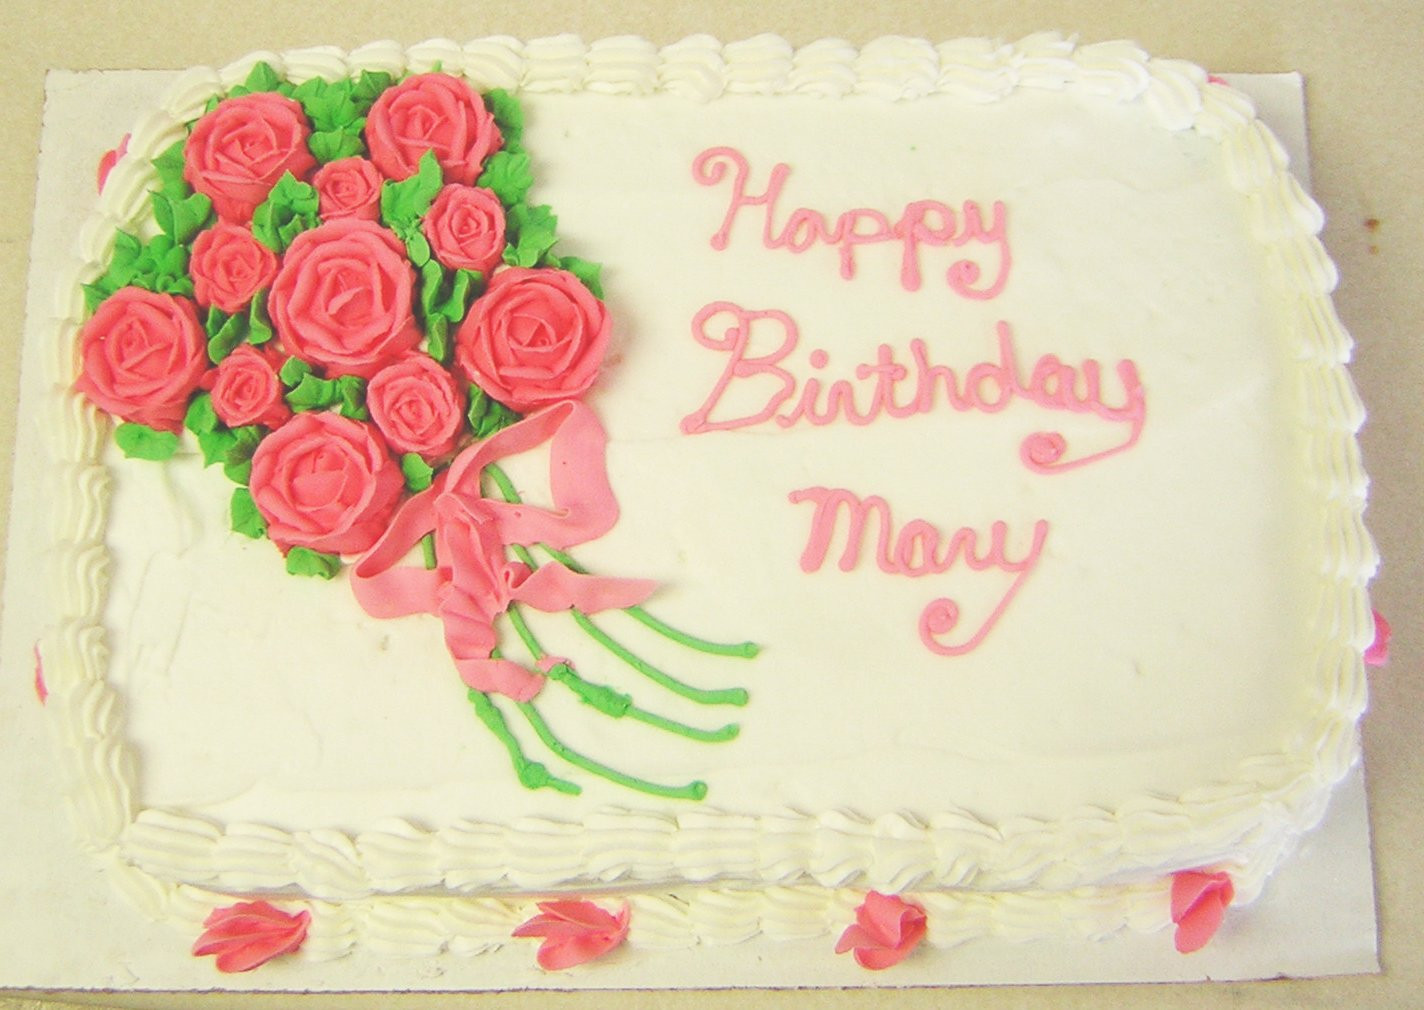 Happy Birthday Mary Cake
 Potential Regalements